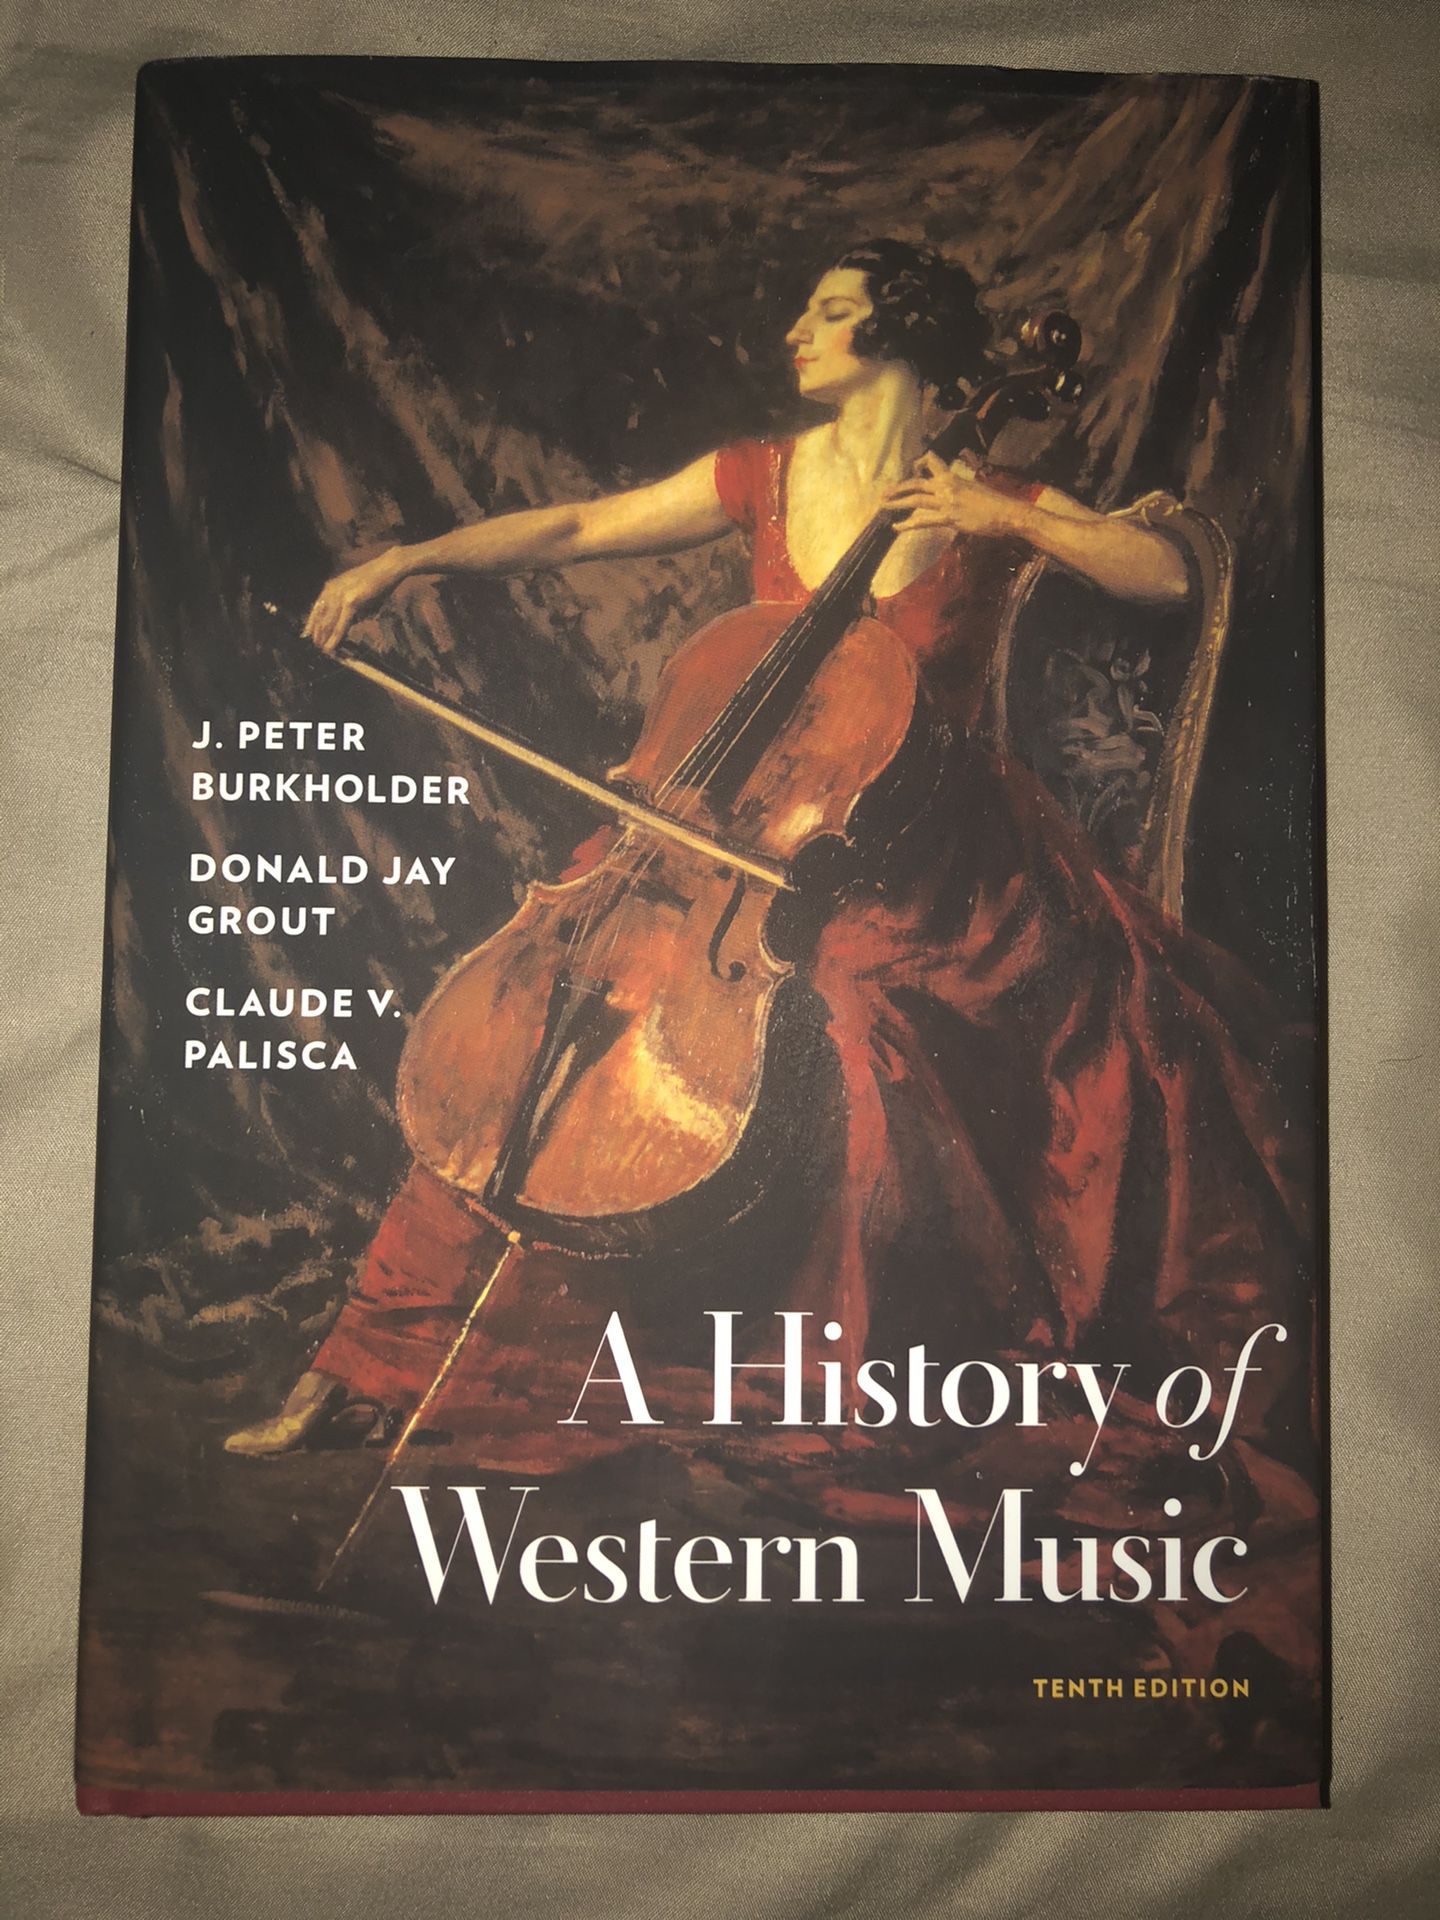 A History of Western Music 10th Edition